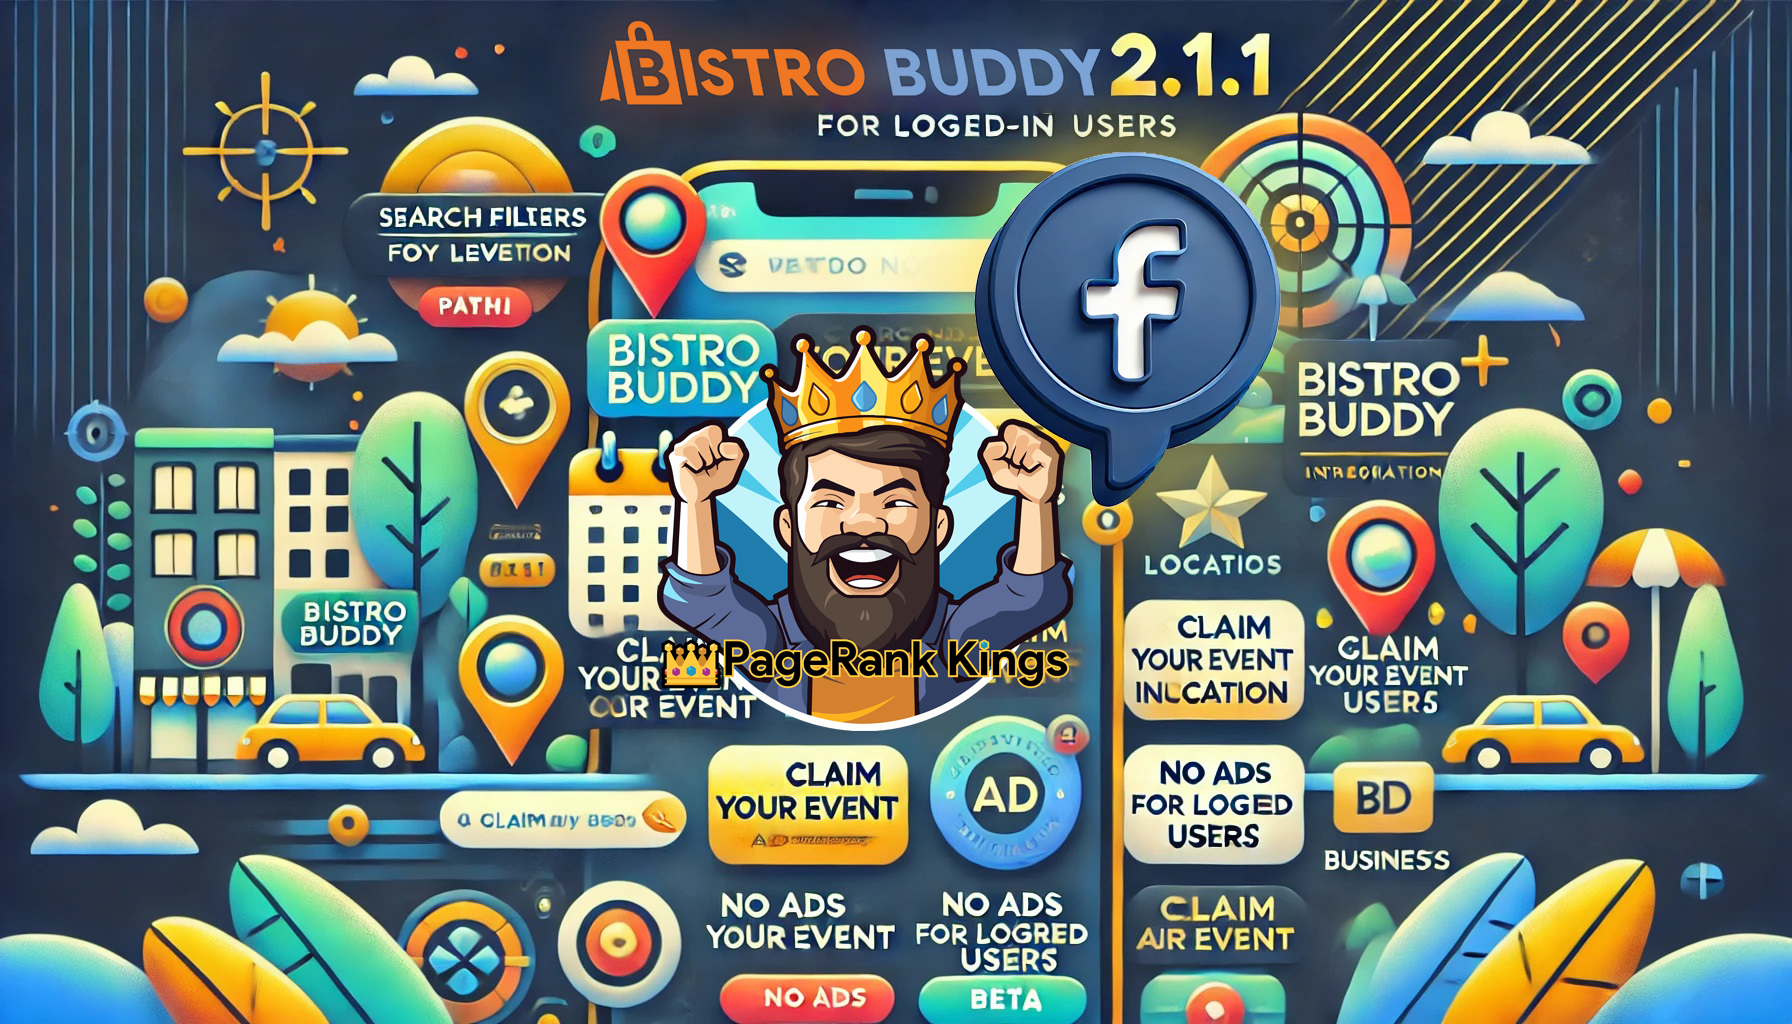 BISTRO BUDDY Version 2.1.1 Patch Notes